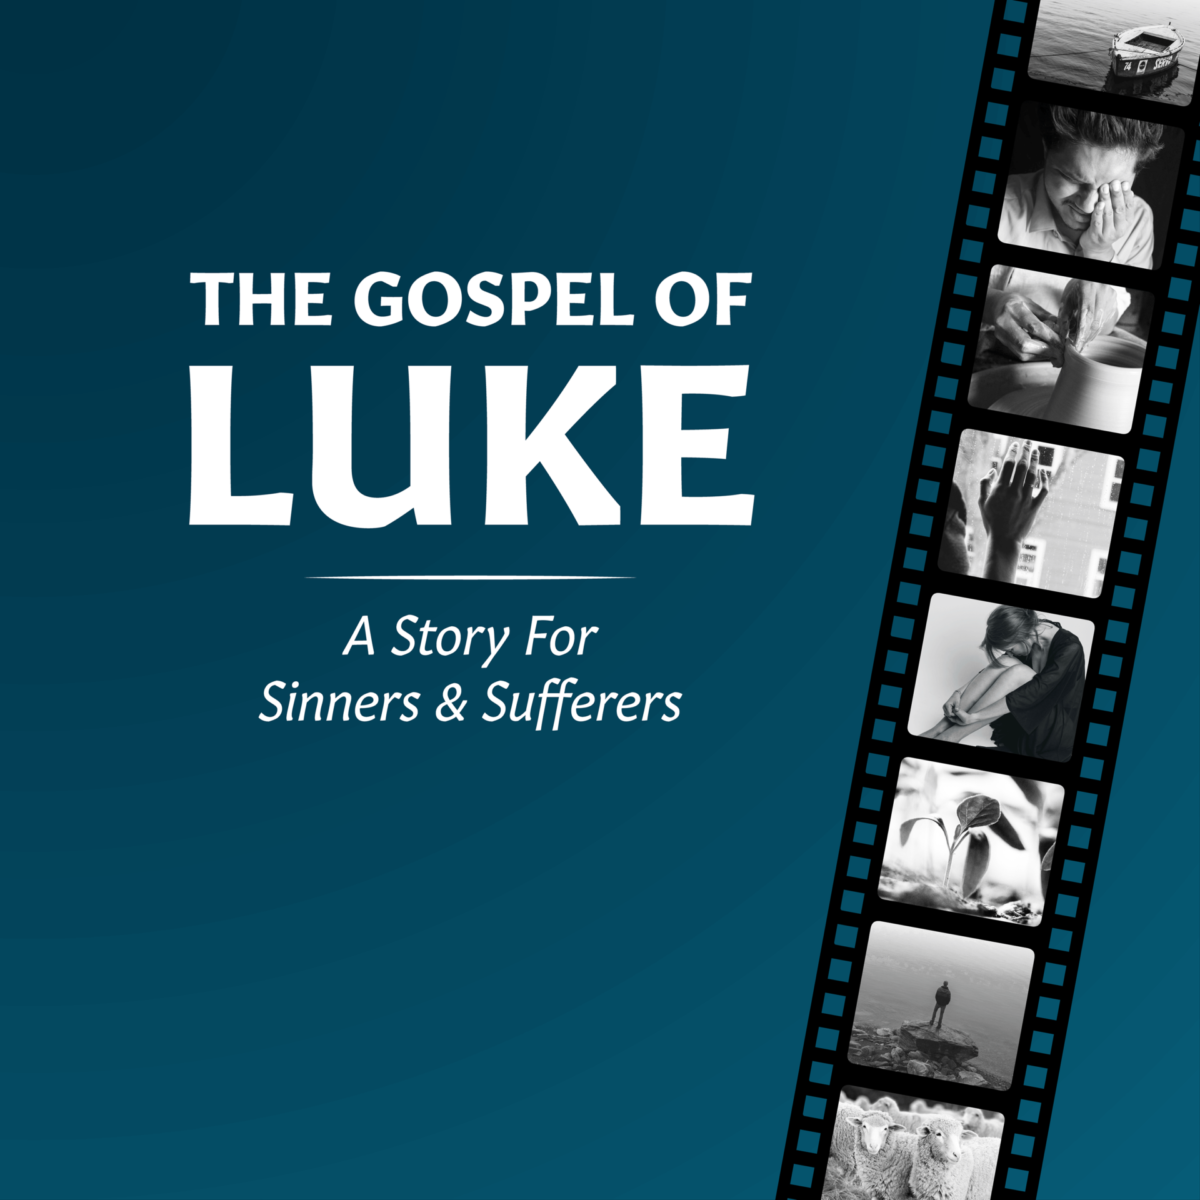 The Gospel of Luke Sermon Series: A Story for Sinners and Sufferers square image with photos depicting stories from the Gospel of Luke